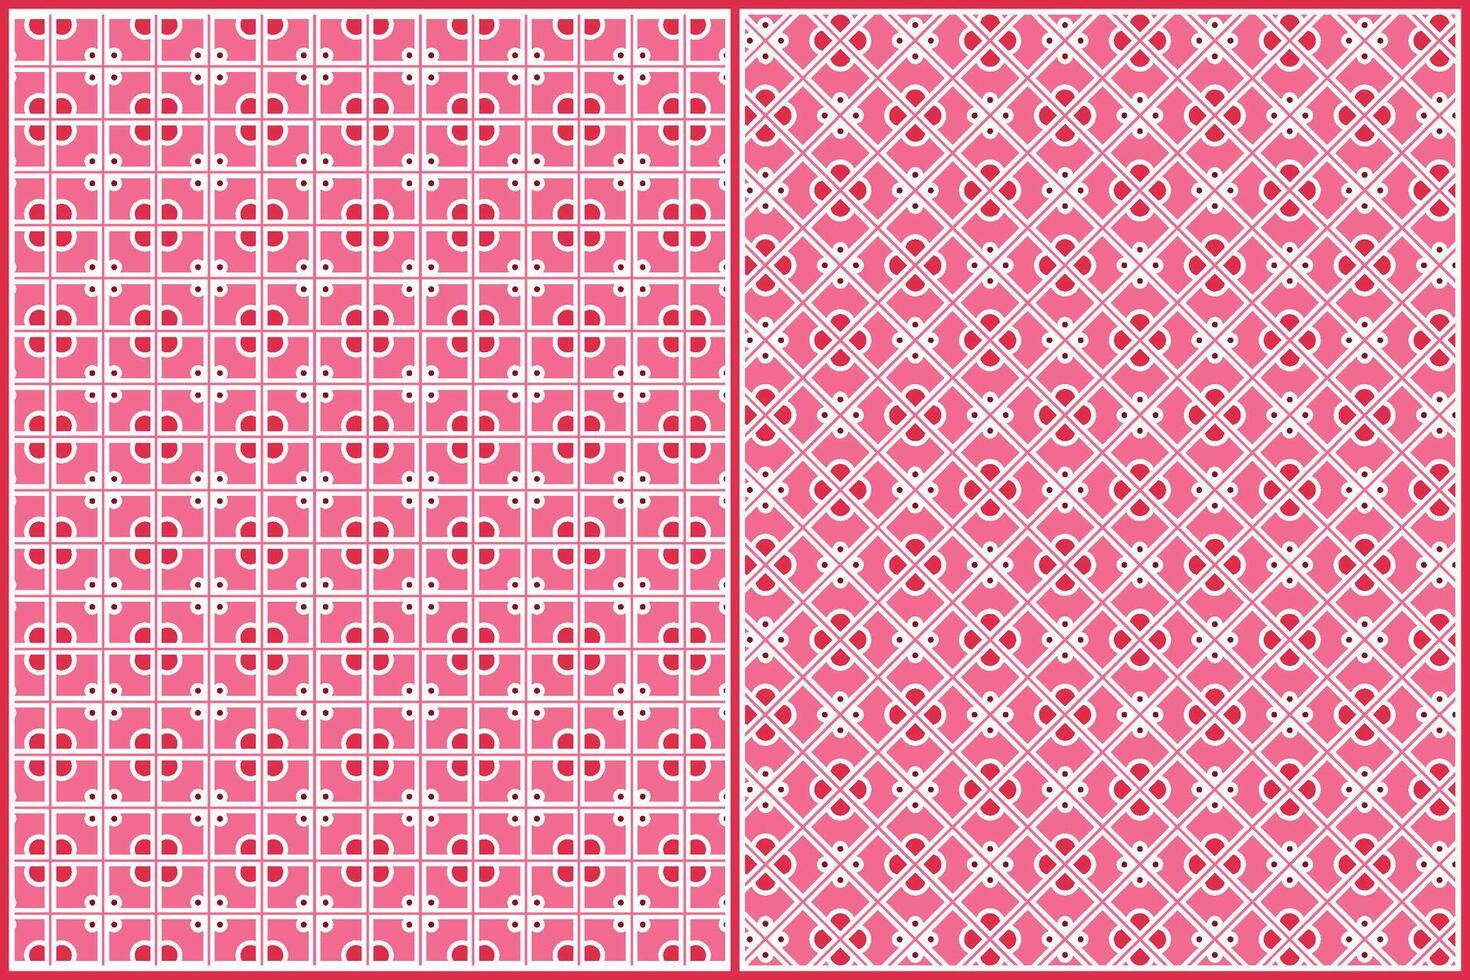 general vintage tablecloth pattern with beautiful dominant pink color vector